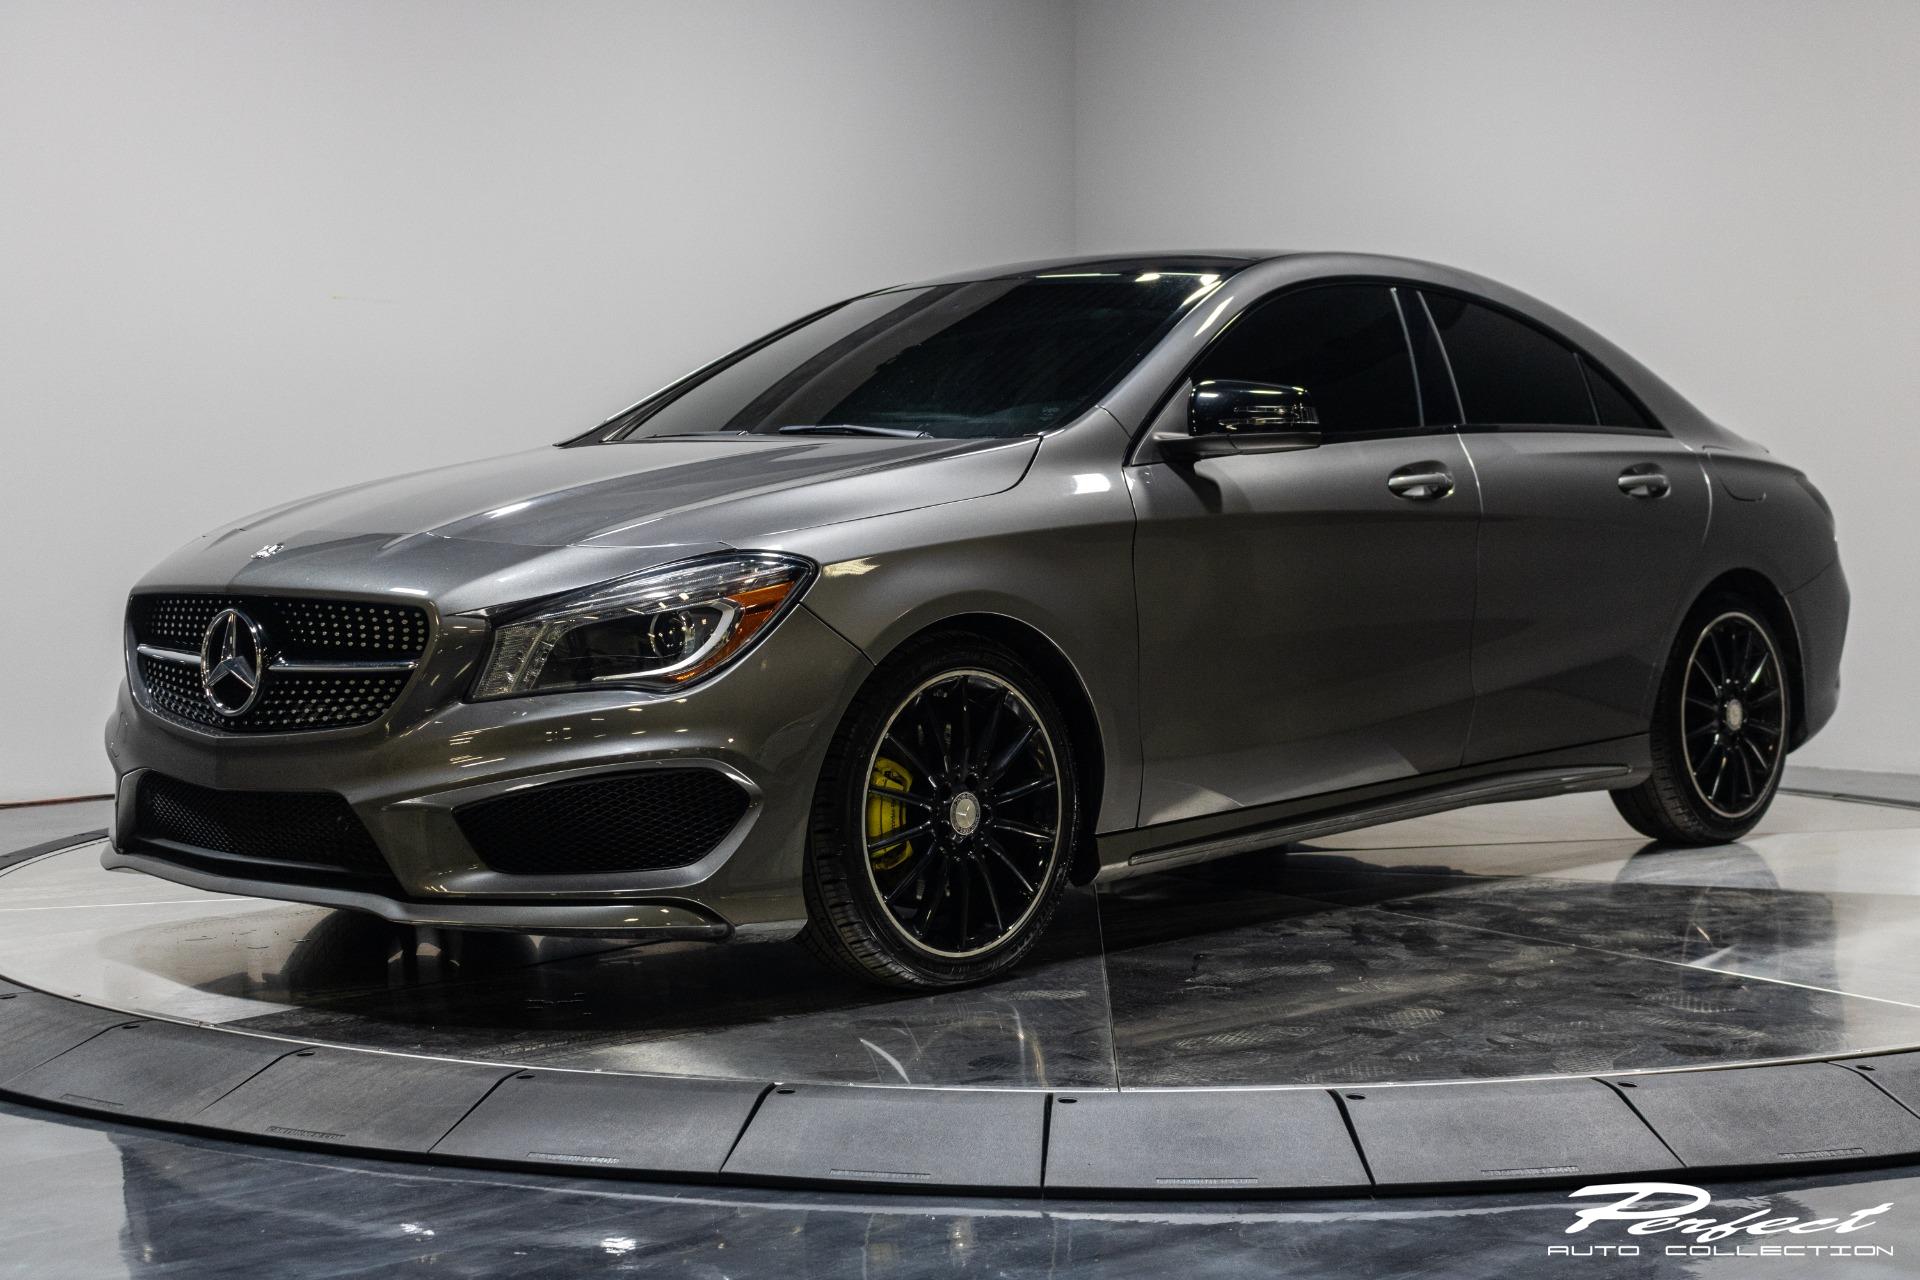 Used 14 Mercedes Benz Cla Cla 250 4matic Edition 1 For Sale 19 3 Perfect Auto Collection Stock